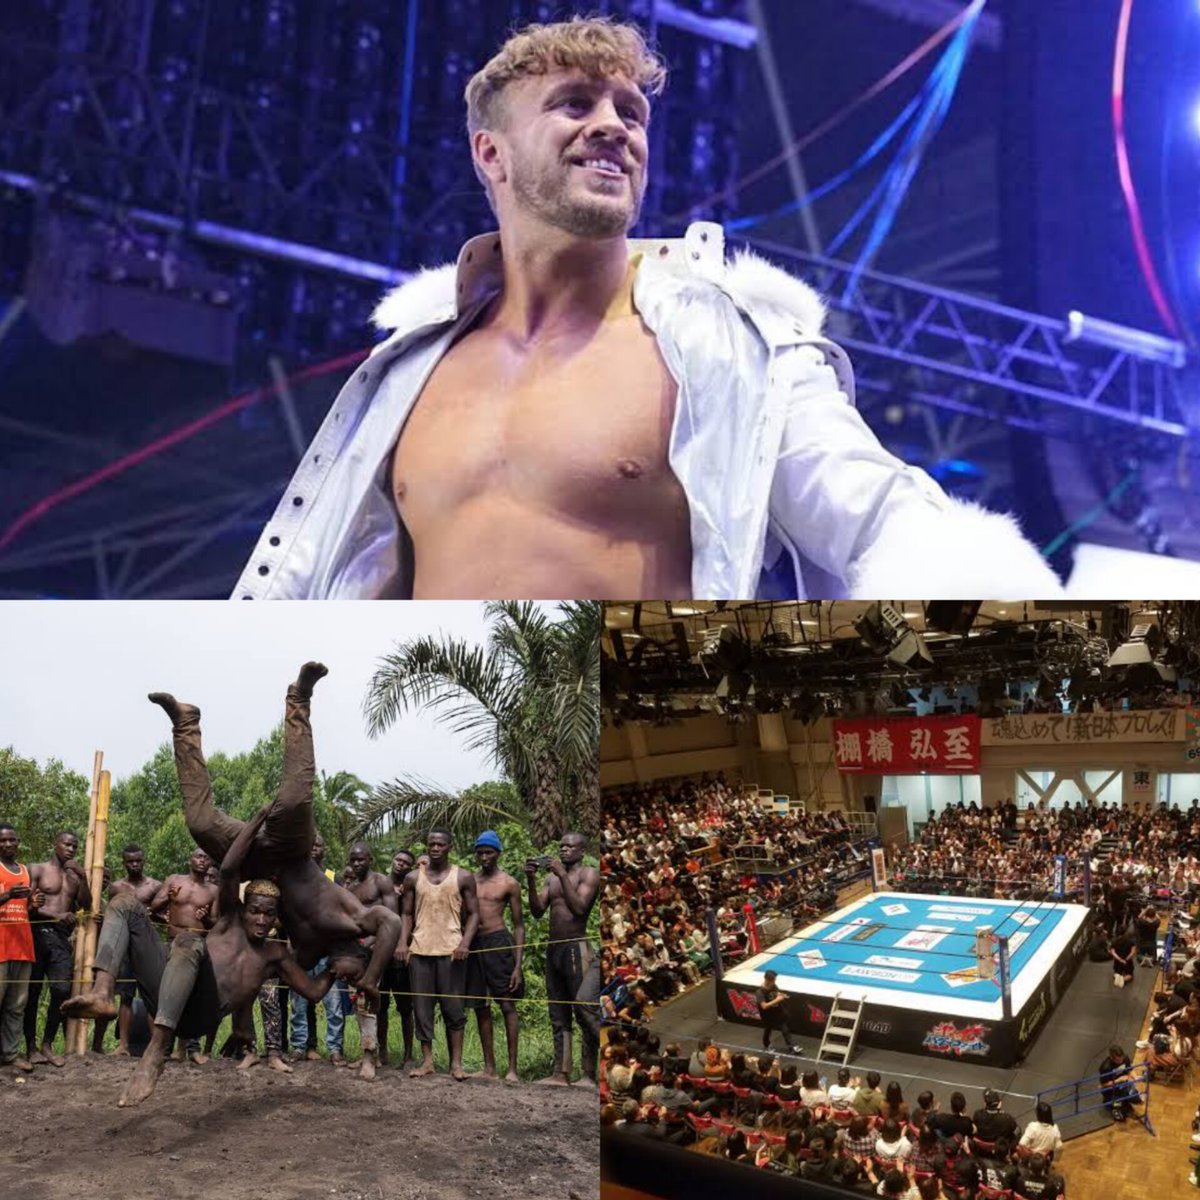 Will Ospreay via Swerve City podcast says that he wants AEW to do more international tours and shows, believing that the best way AEW can grow is by TRAVEL. “My main goal is, I want to take AEW everywhere. I want to do shows in Tokyo, Osaka... Sydney, I want to go to Melbourne